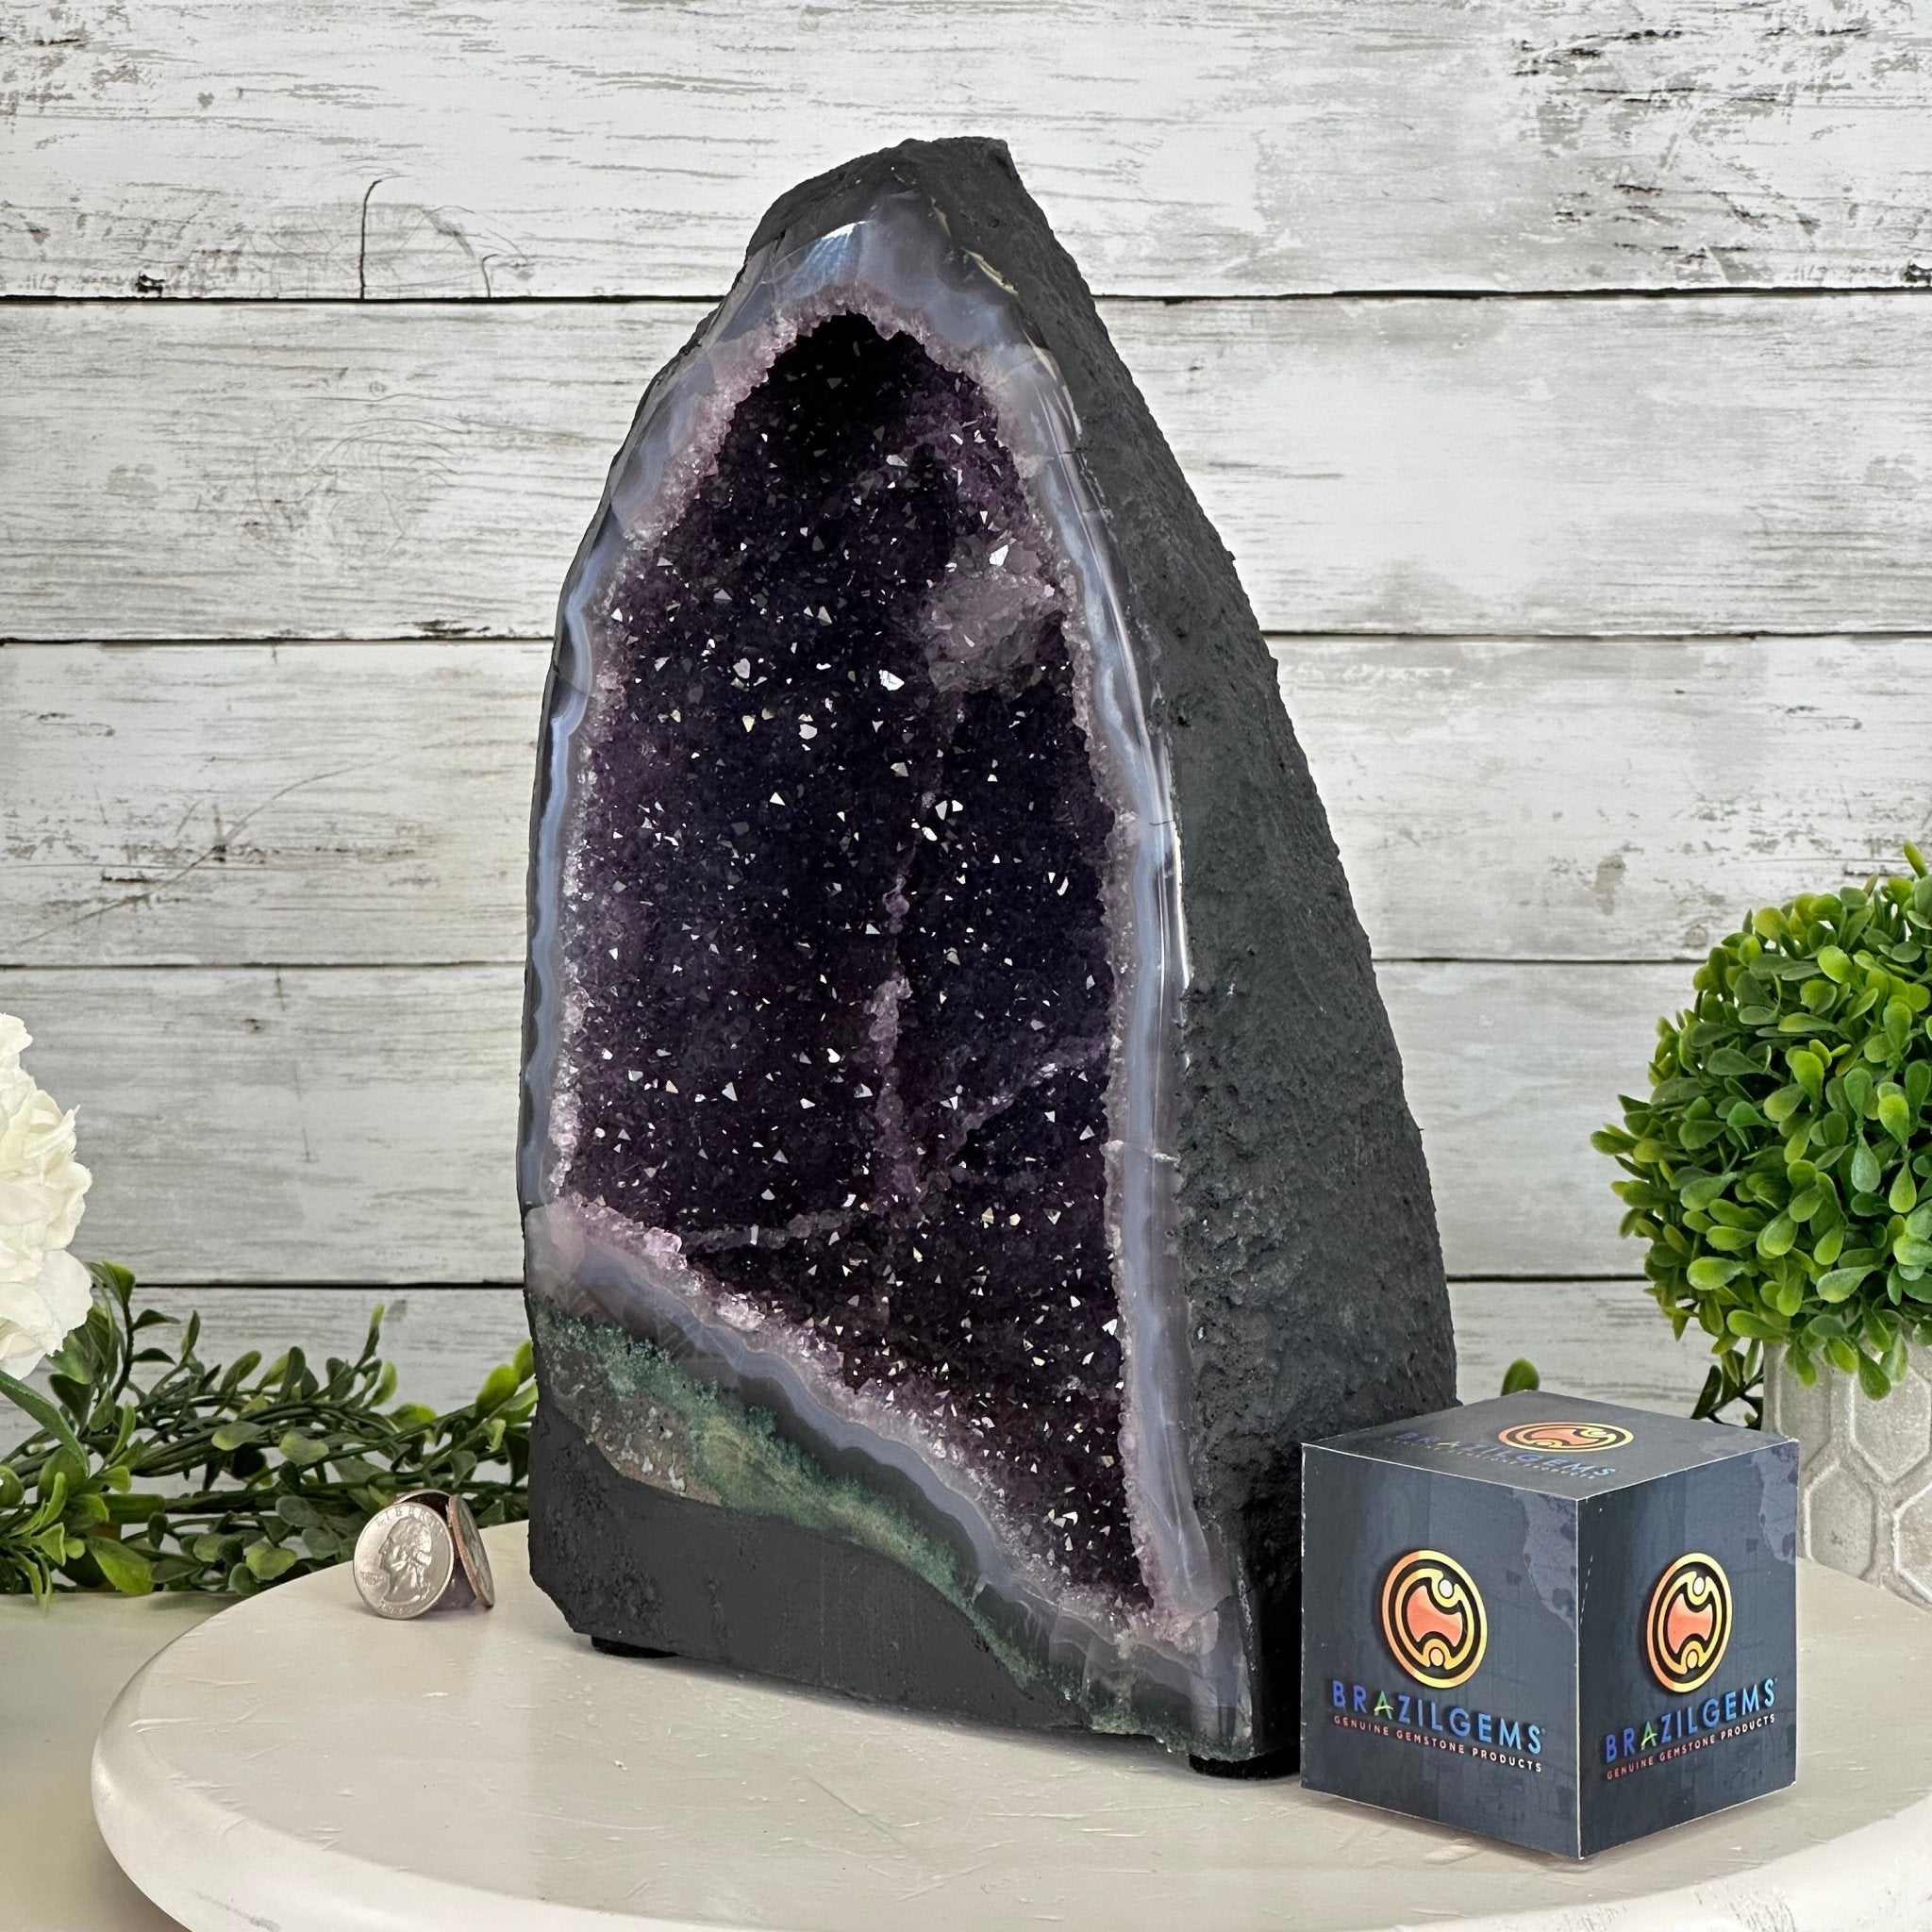 Quality Brazilian Amethyst Cathedral, 15.7 lbs & 12" Tall, #5601 - 1367 - Brazil GemsBrazil GemsQuality Brazilian Amethyst Cathedral, 15.7 lbs & 12" Tall, #5601 - 1367Cathedrals5601 - 1367